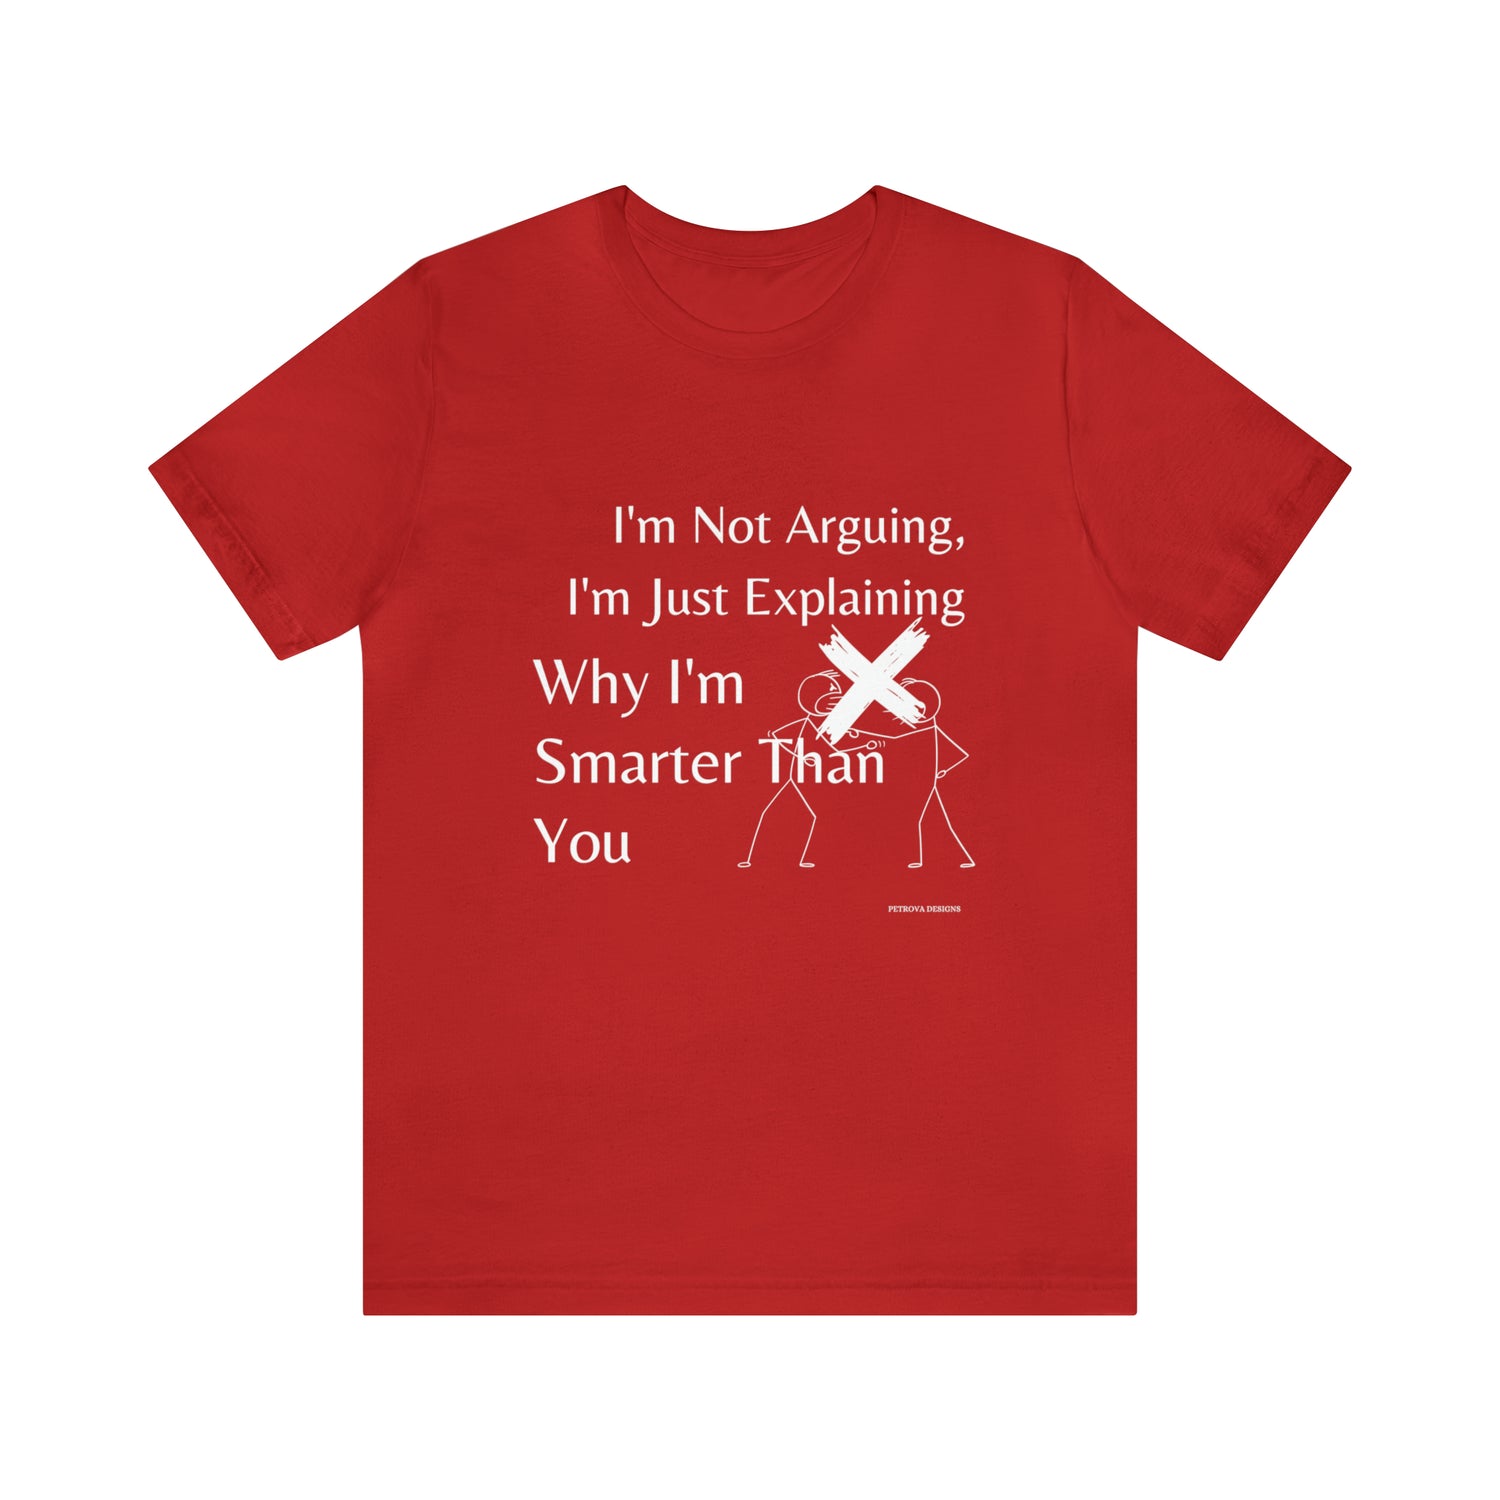 Funny and Humorous T-Shirt Red T-Shirt Petrova Designs